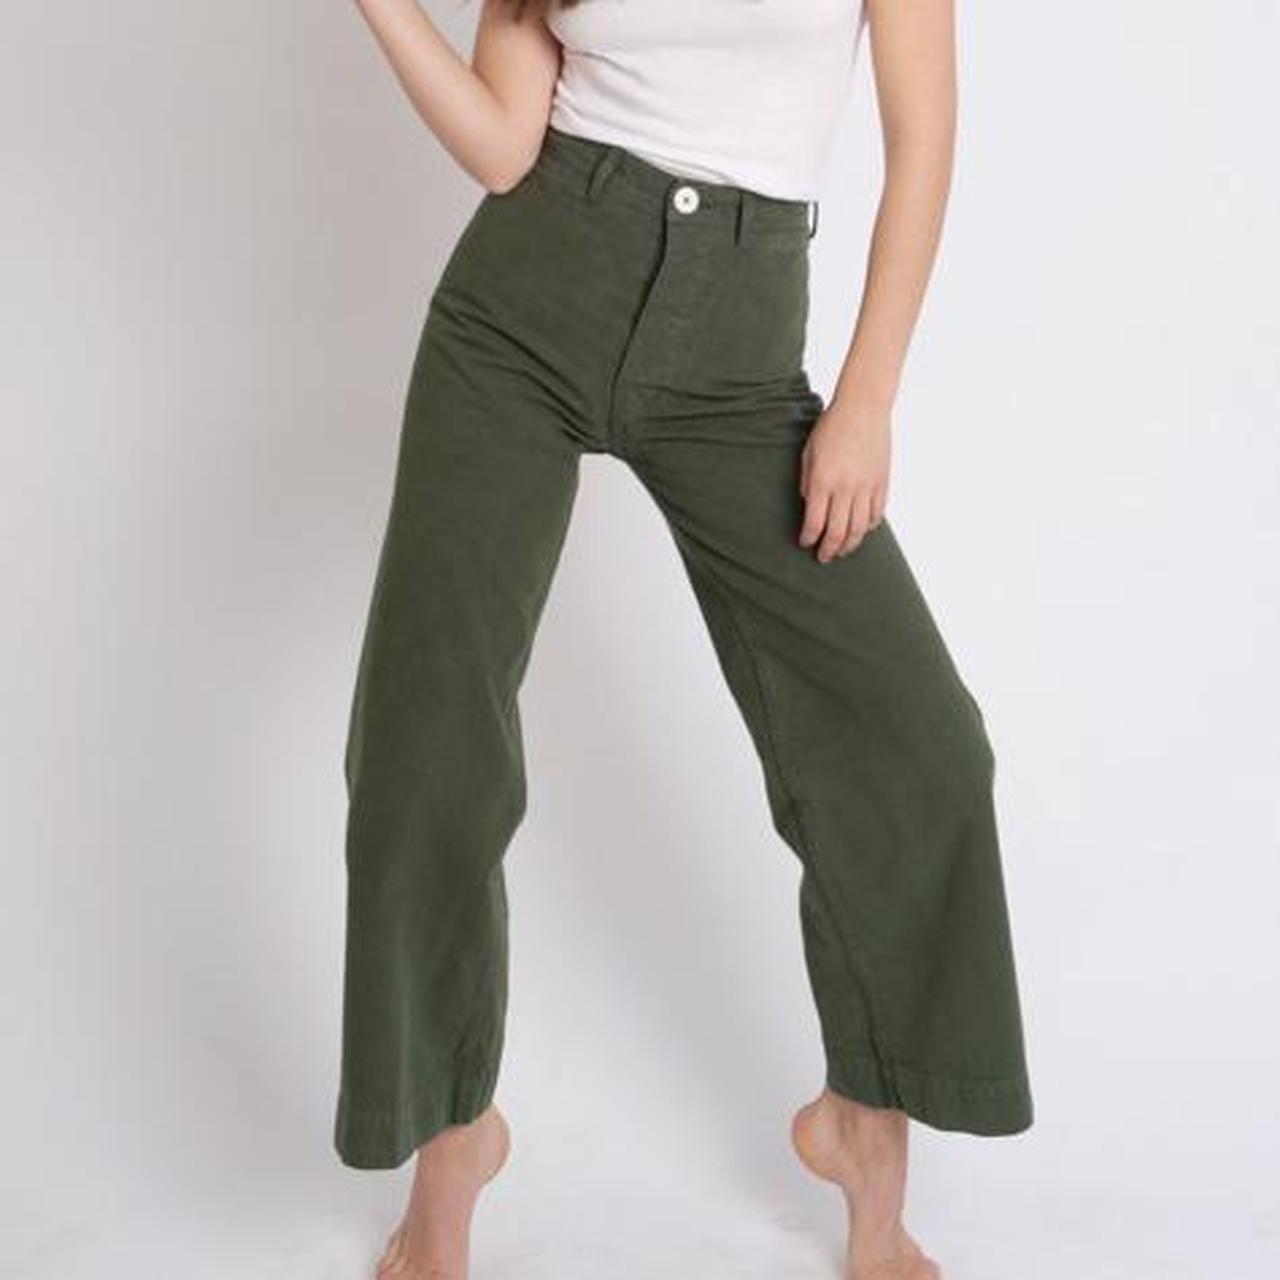 Women's Green and Khaki Jeans